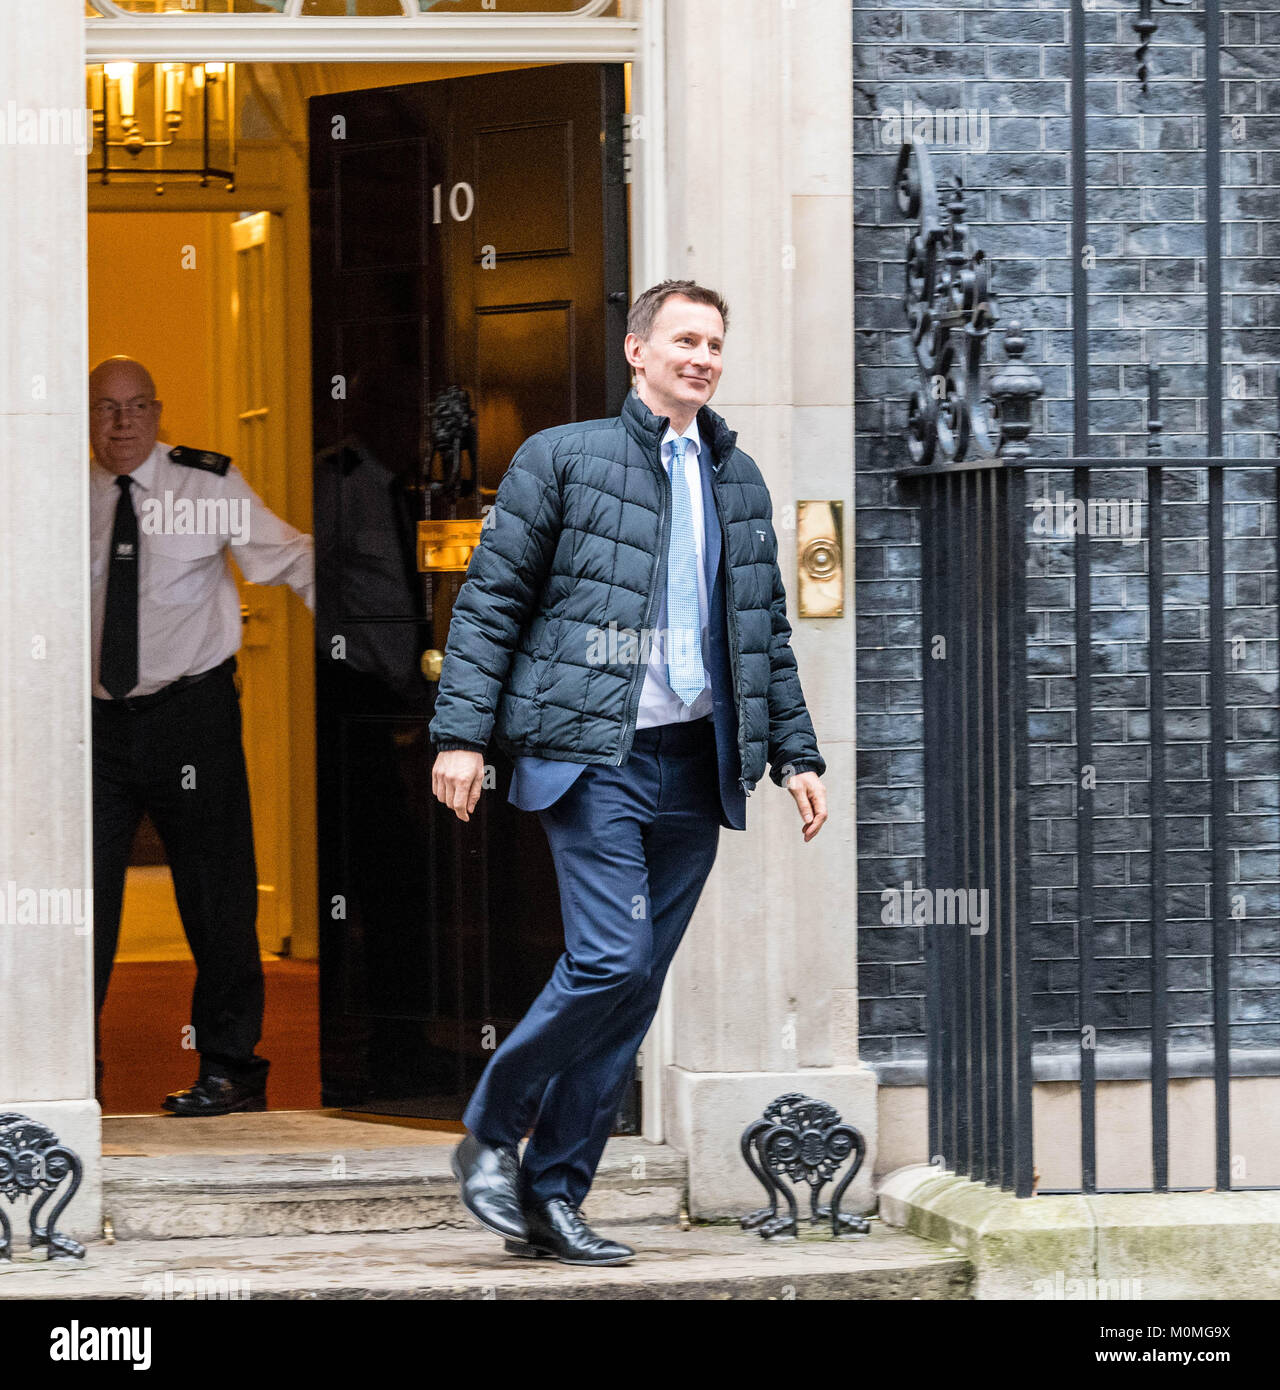 London, UK. 23rd January, 2018. Jeremy Hunt, Health Secretary leaves 10 Downing Street following a cabinet meeting.  He refused to answers reporters questions on Boris Johnson's initiative on NHS funding including a question 'Is Boris during your job now?' Credit: Ian Davidson/Alamy Live News Stock Photo